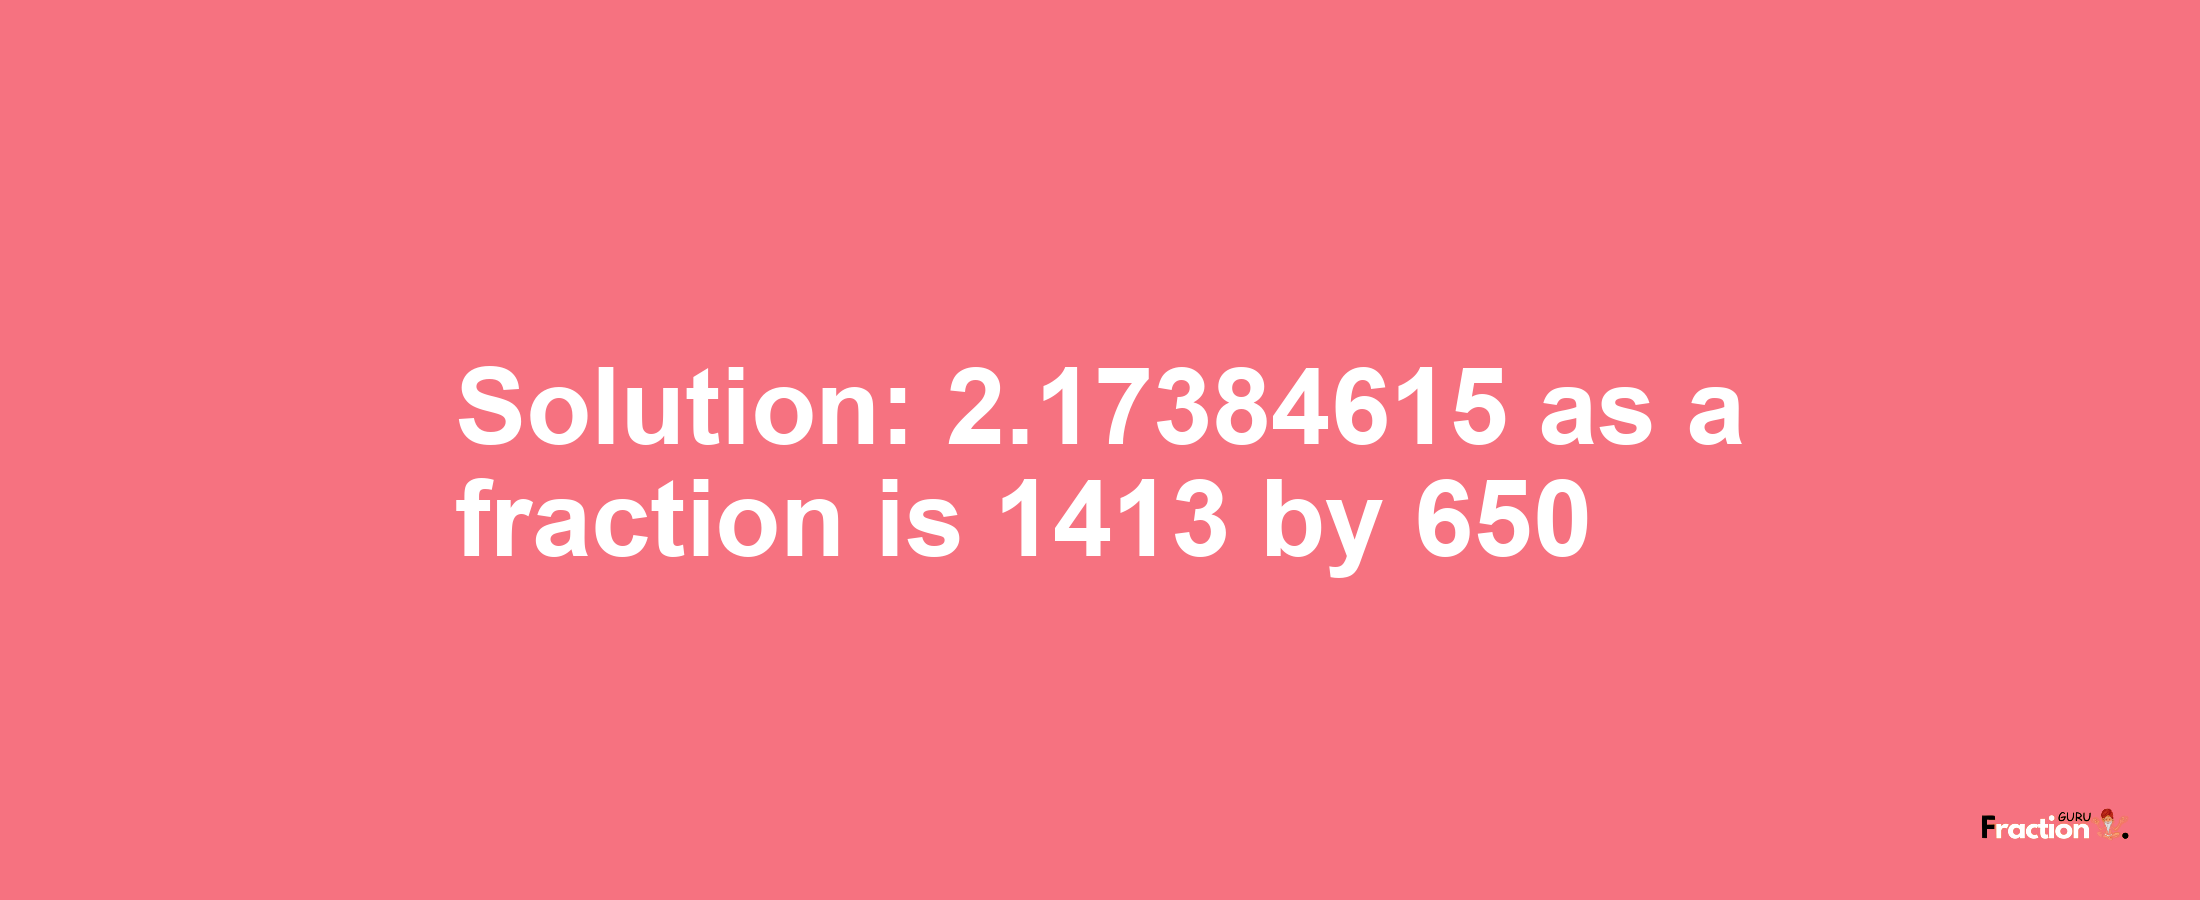 Solution:2.17384615 as a fraction is 1413/650